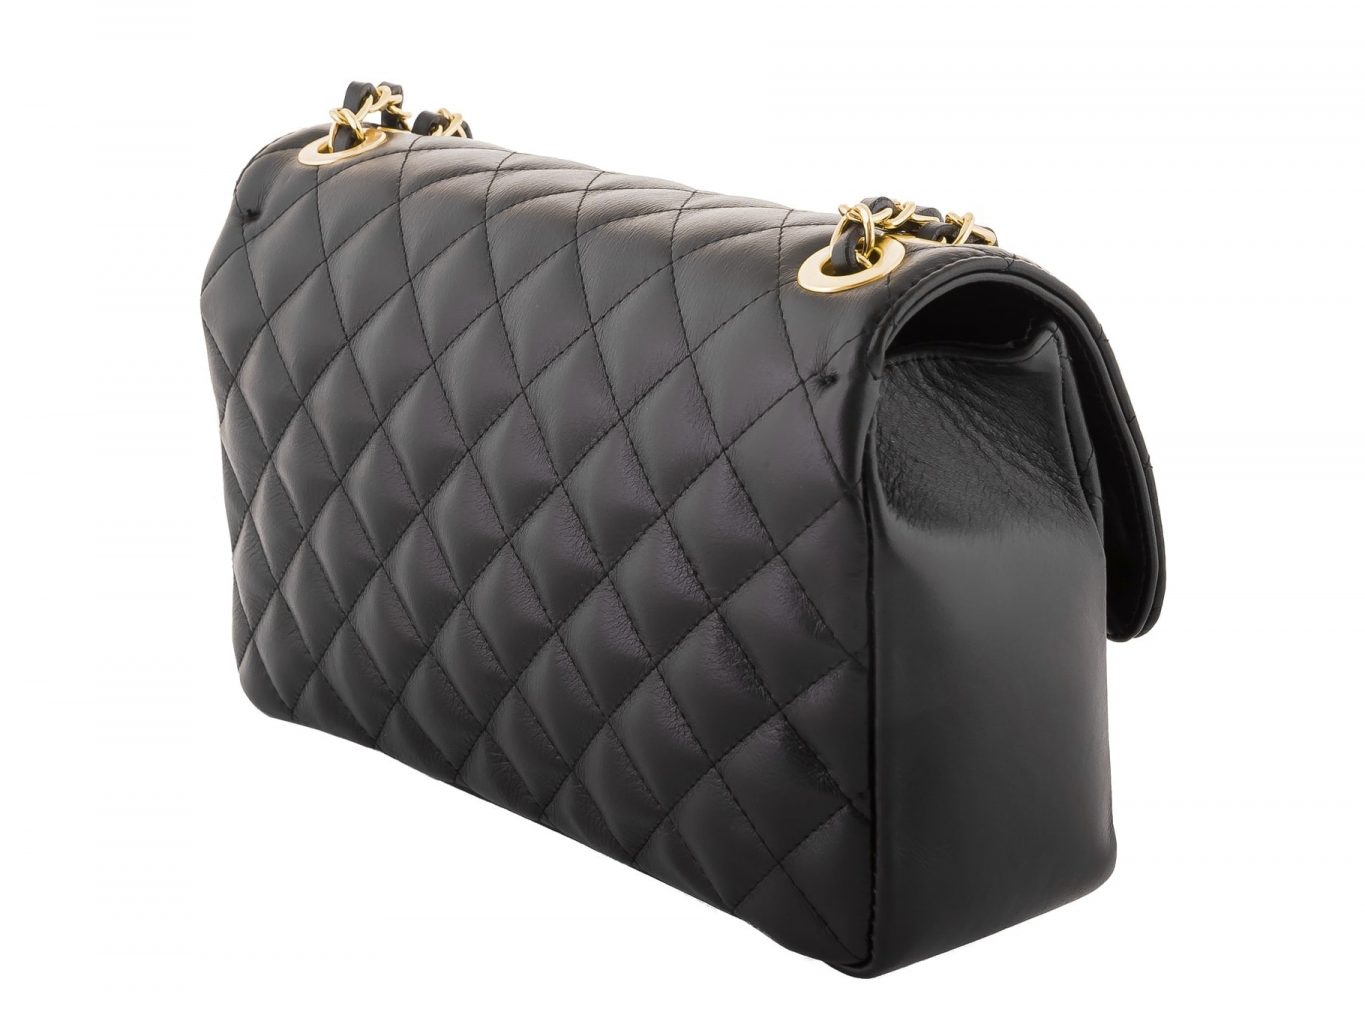 Iconic Quilted Clutch by Elsanna Portea